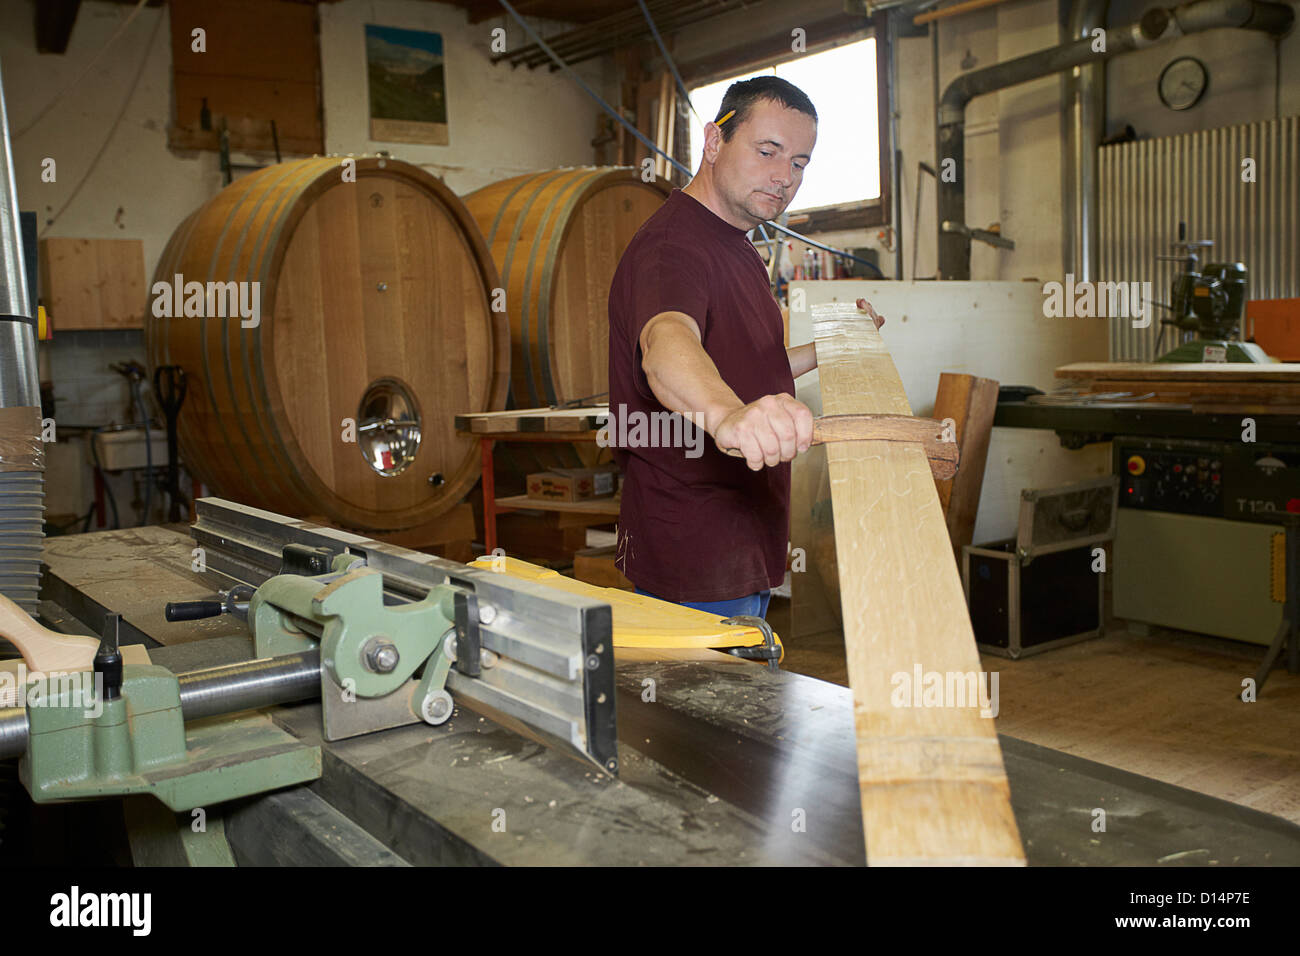 Worker examining wood in shop Stock Photo